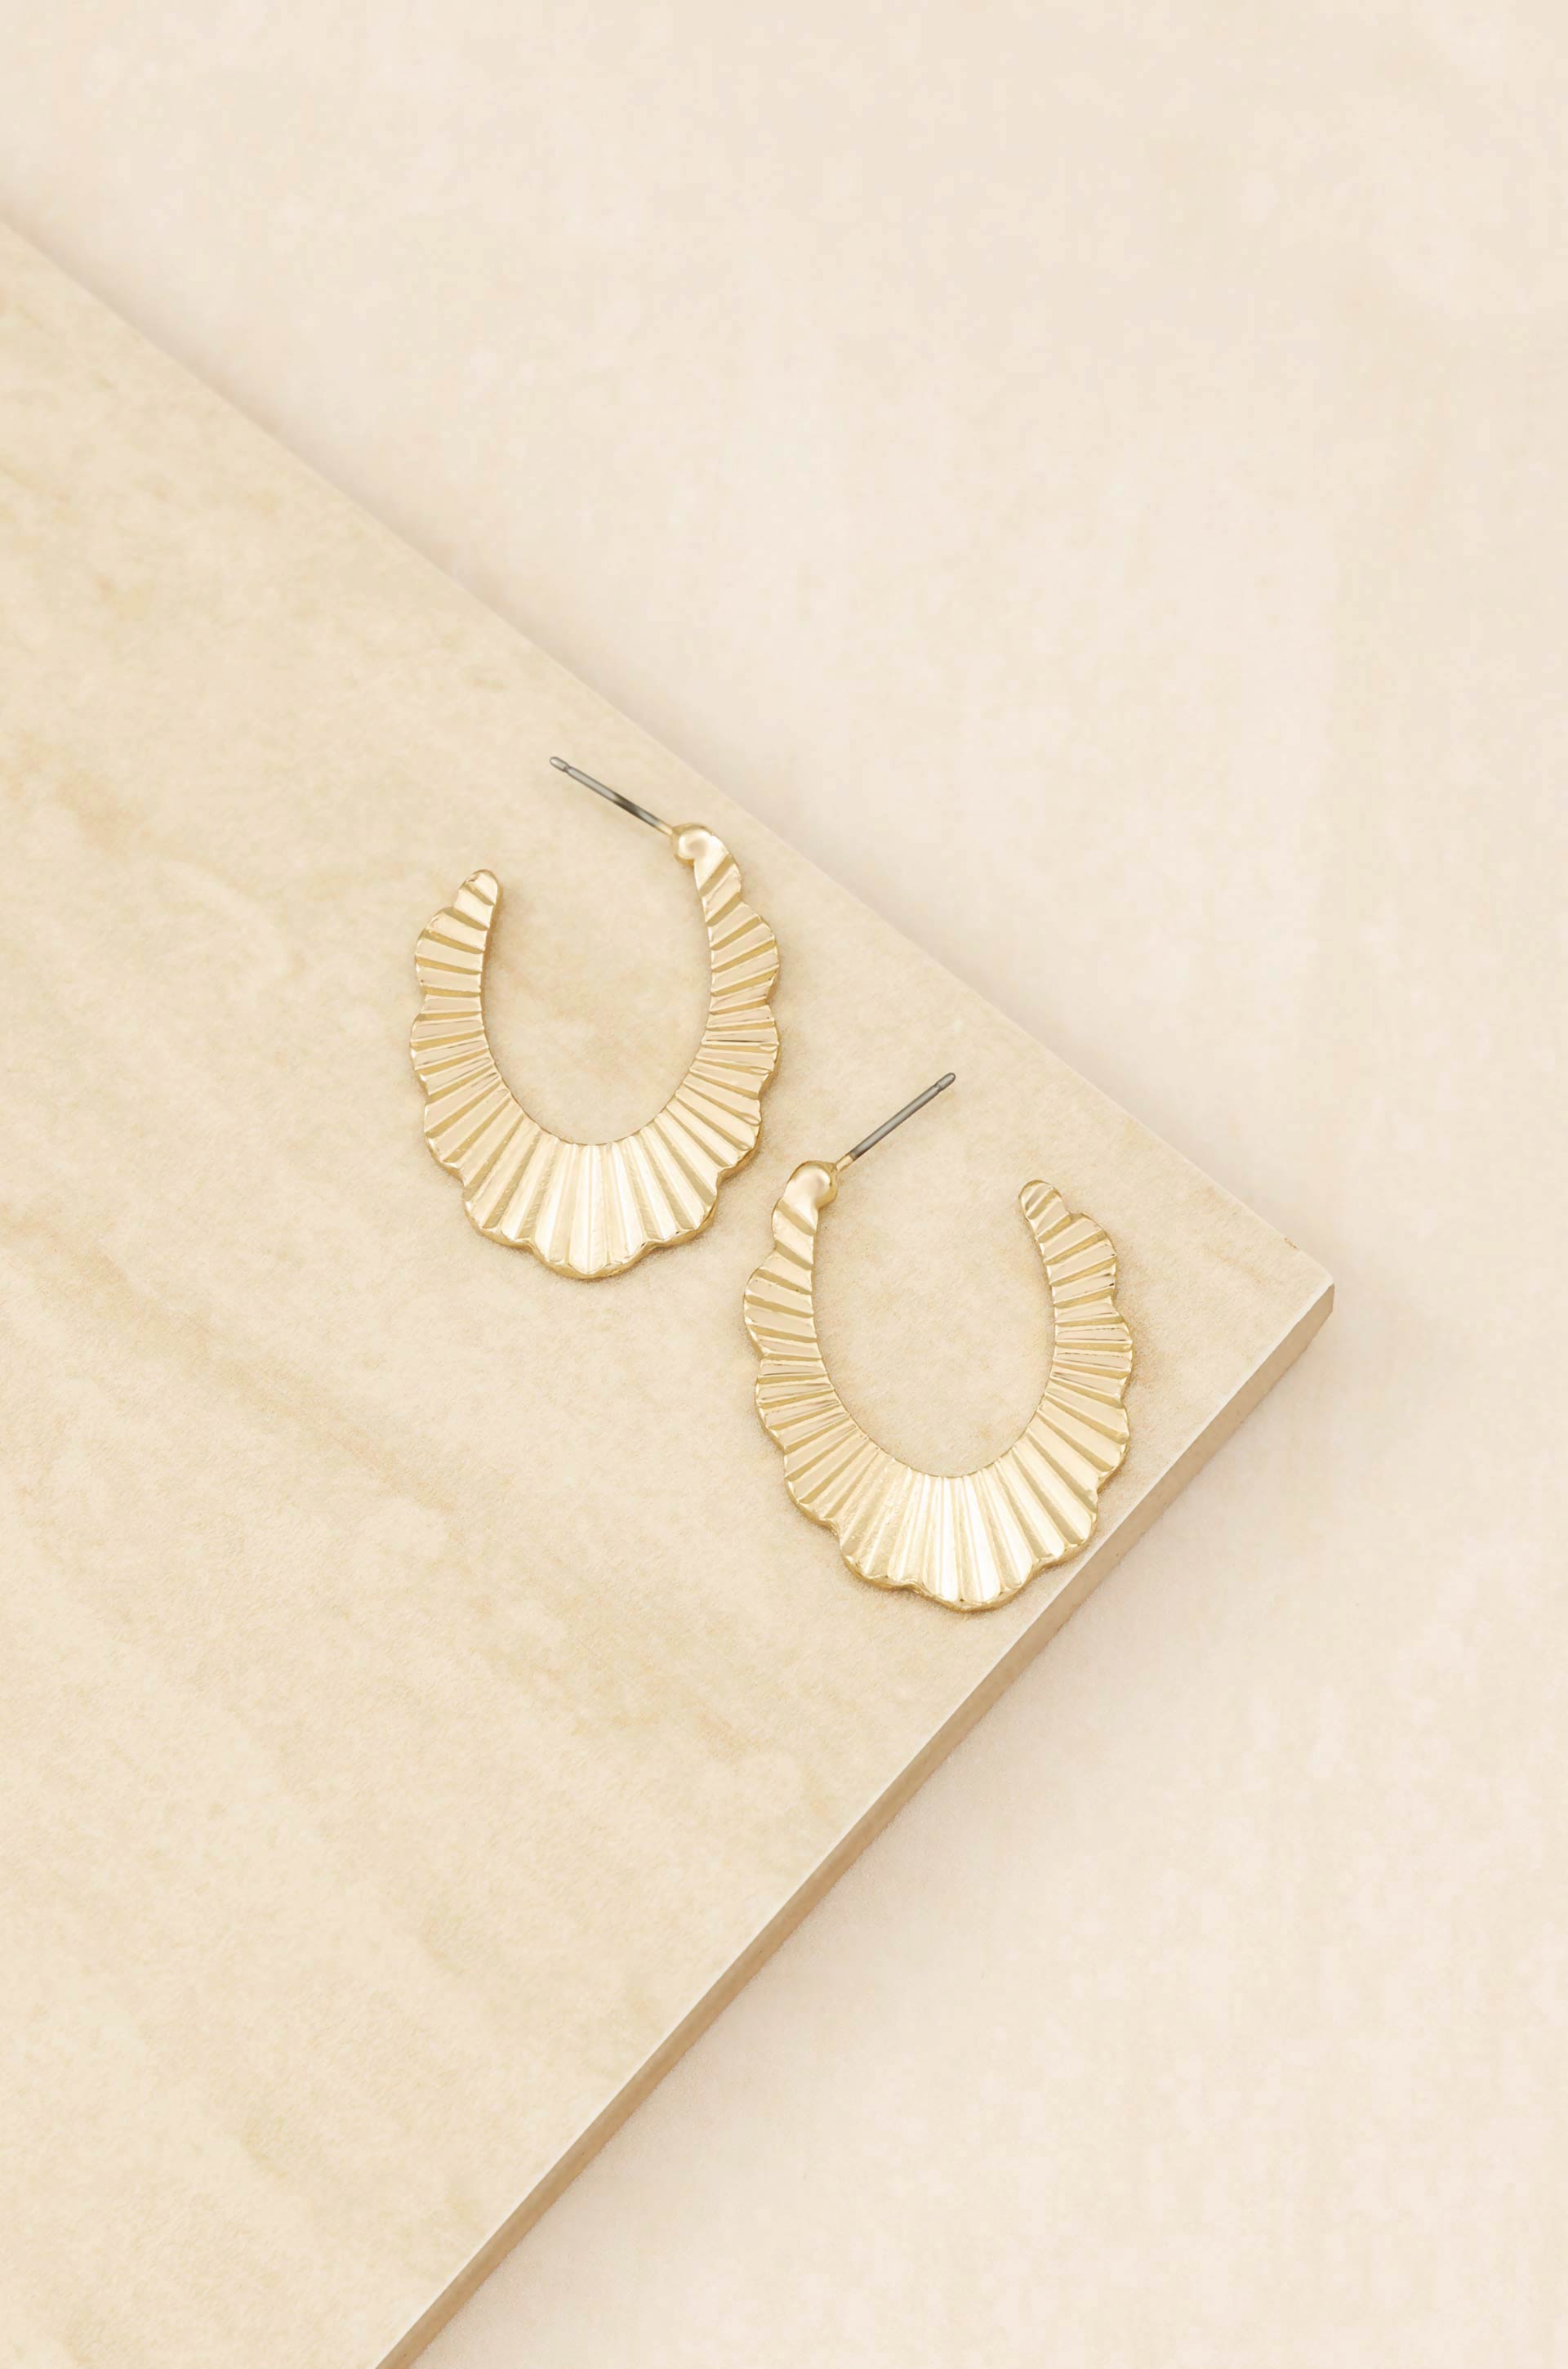 Textured Relics 18k Gold Plated Hoop Earrings on slate background